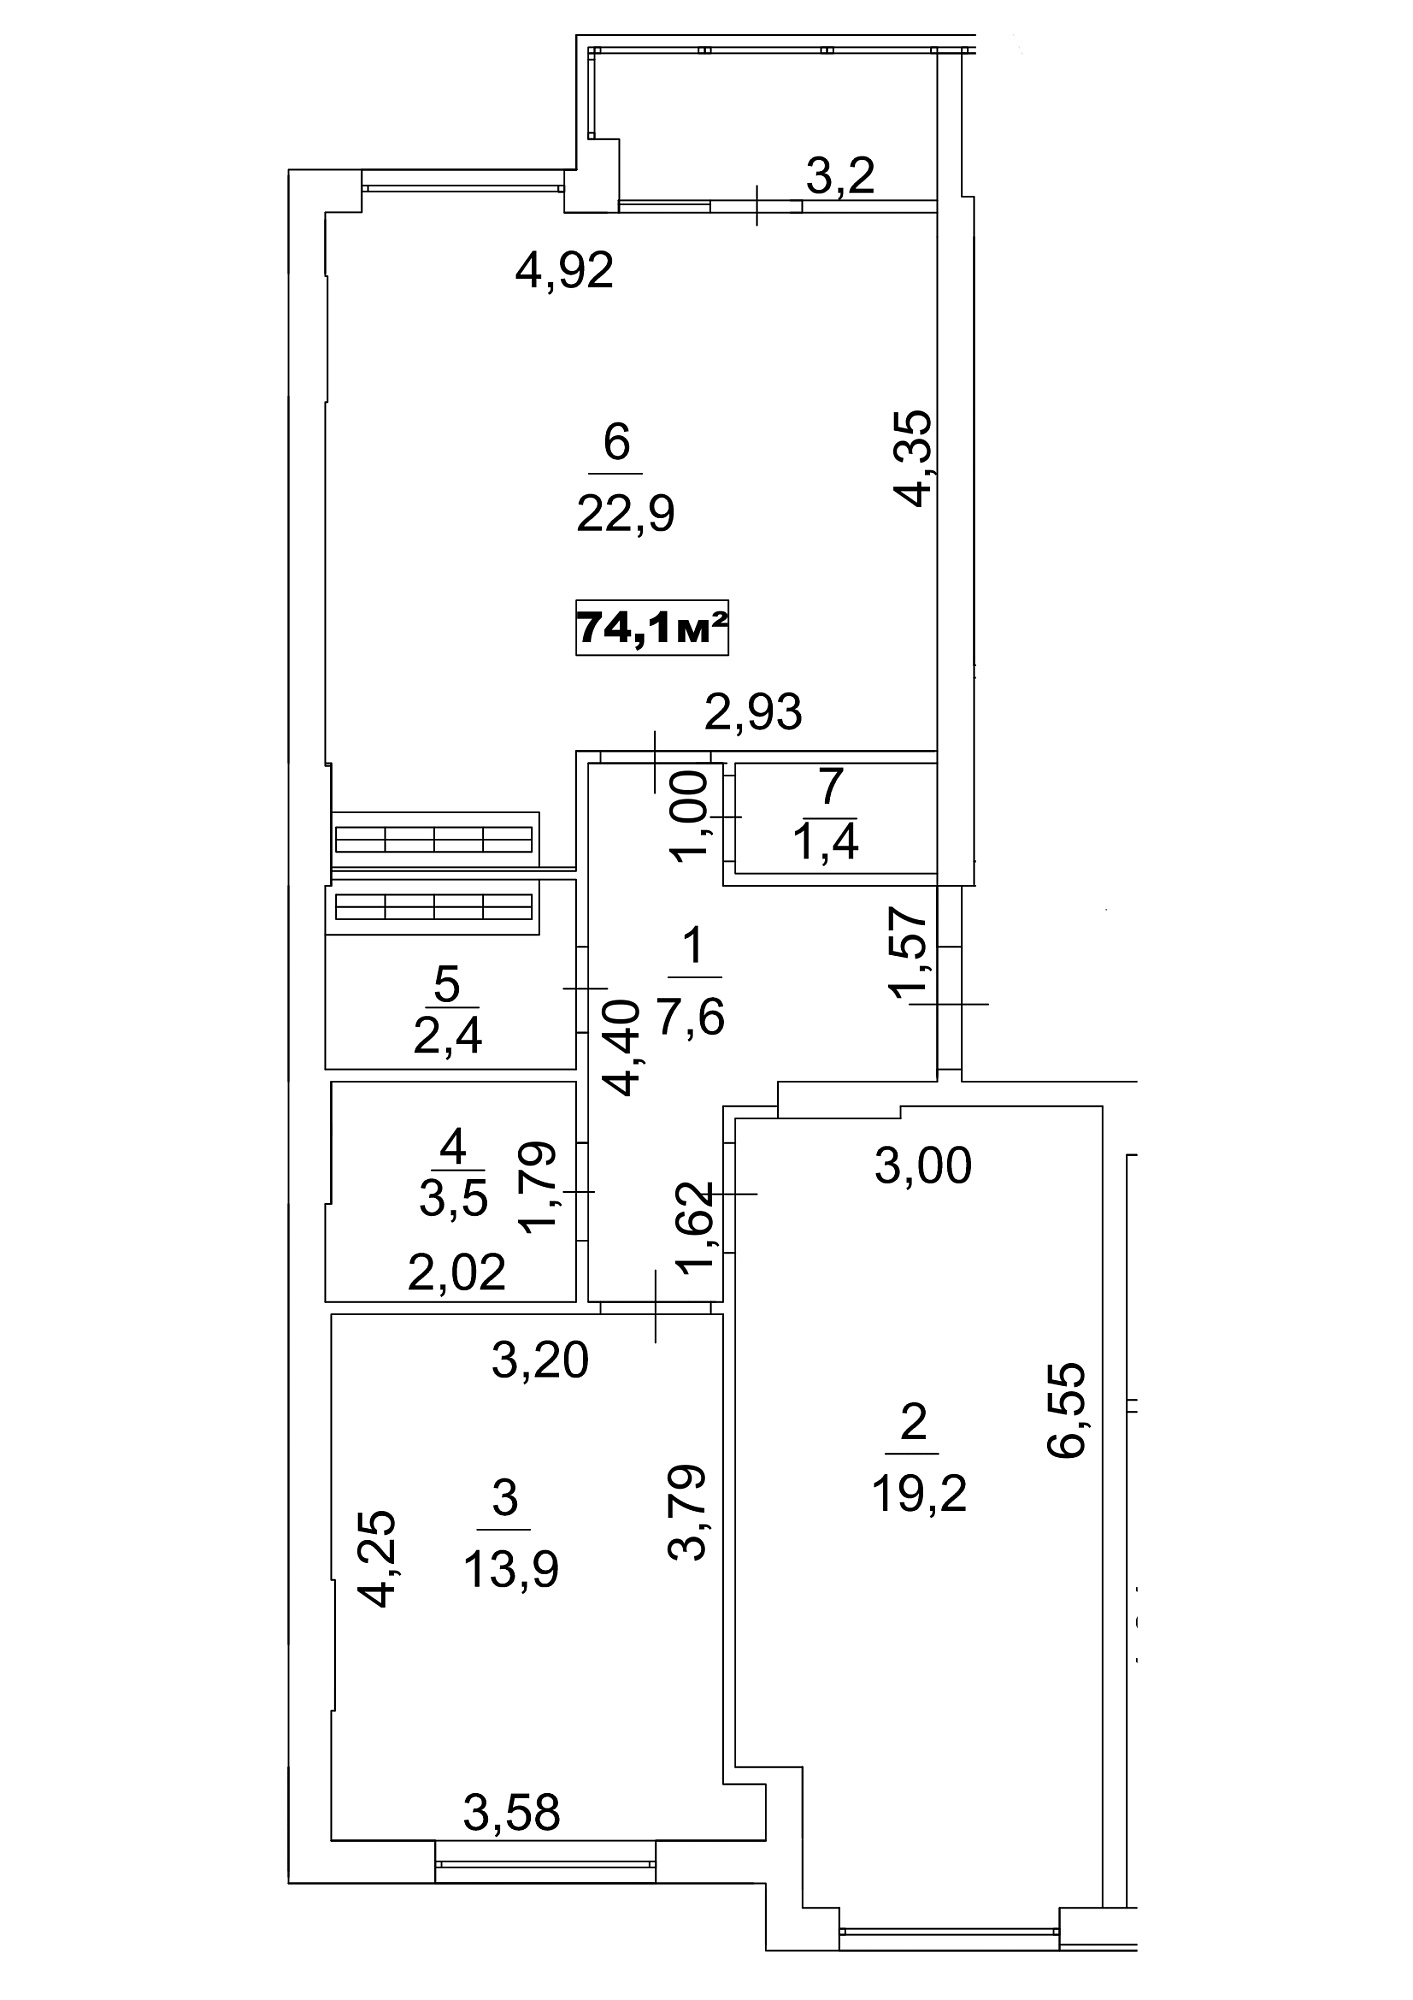 Planning 2-rm flats area 74.1m2, AB-13-01/00003.